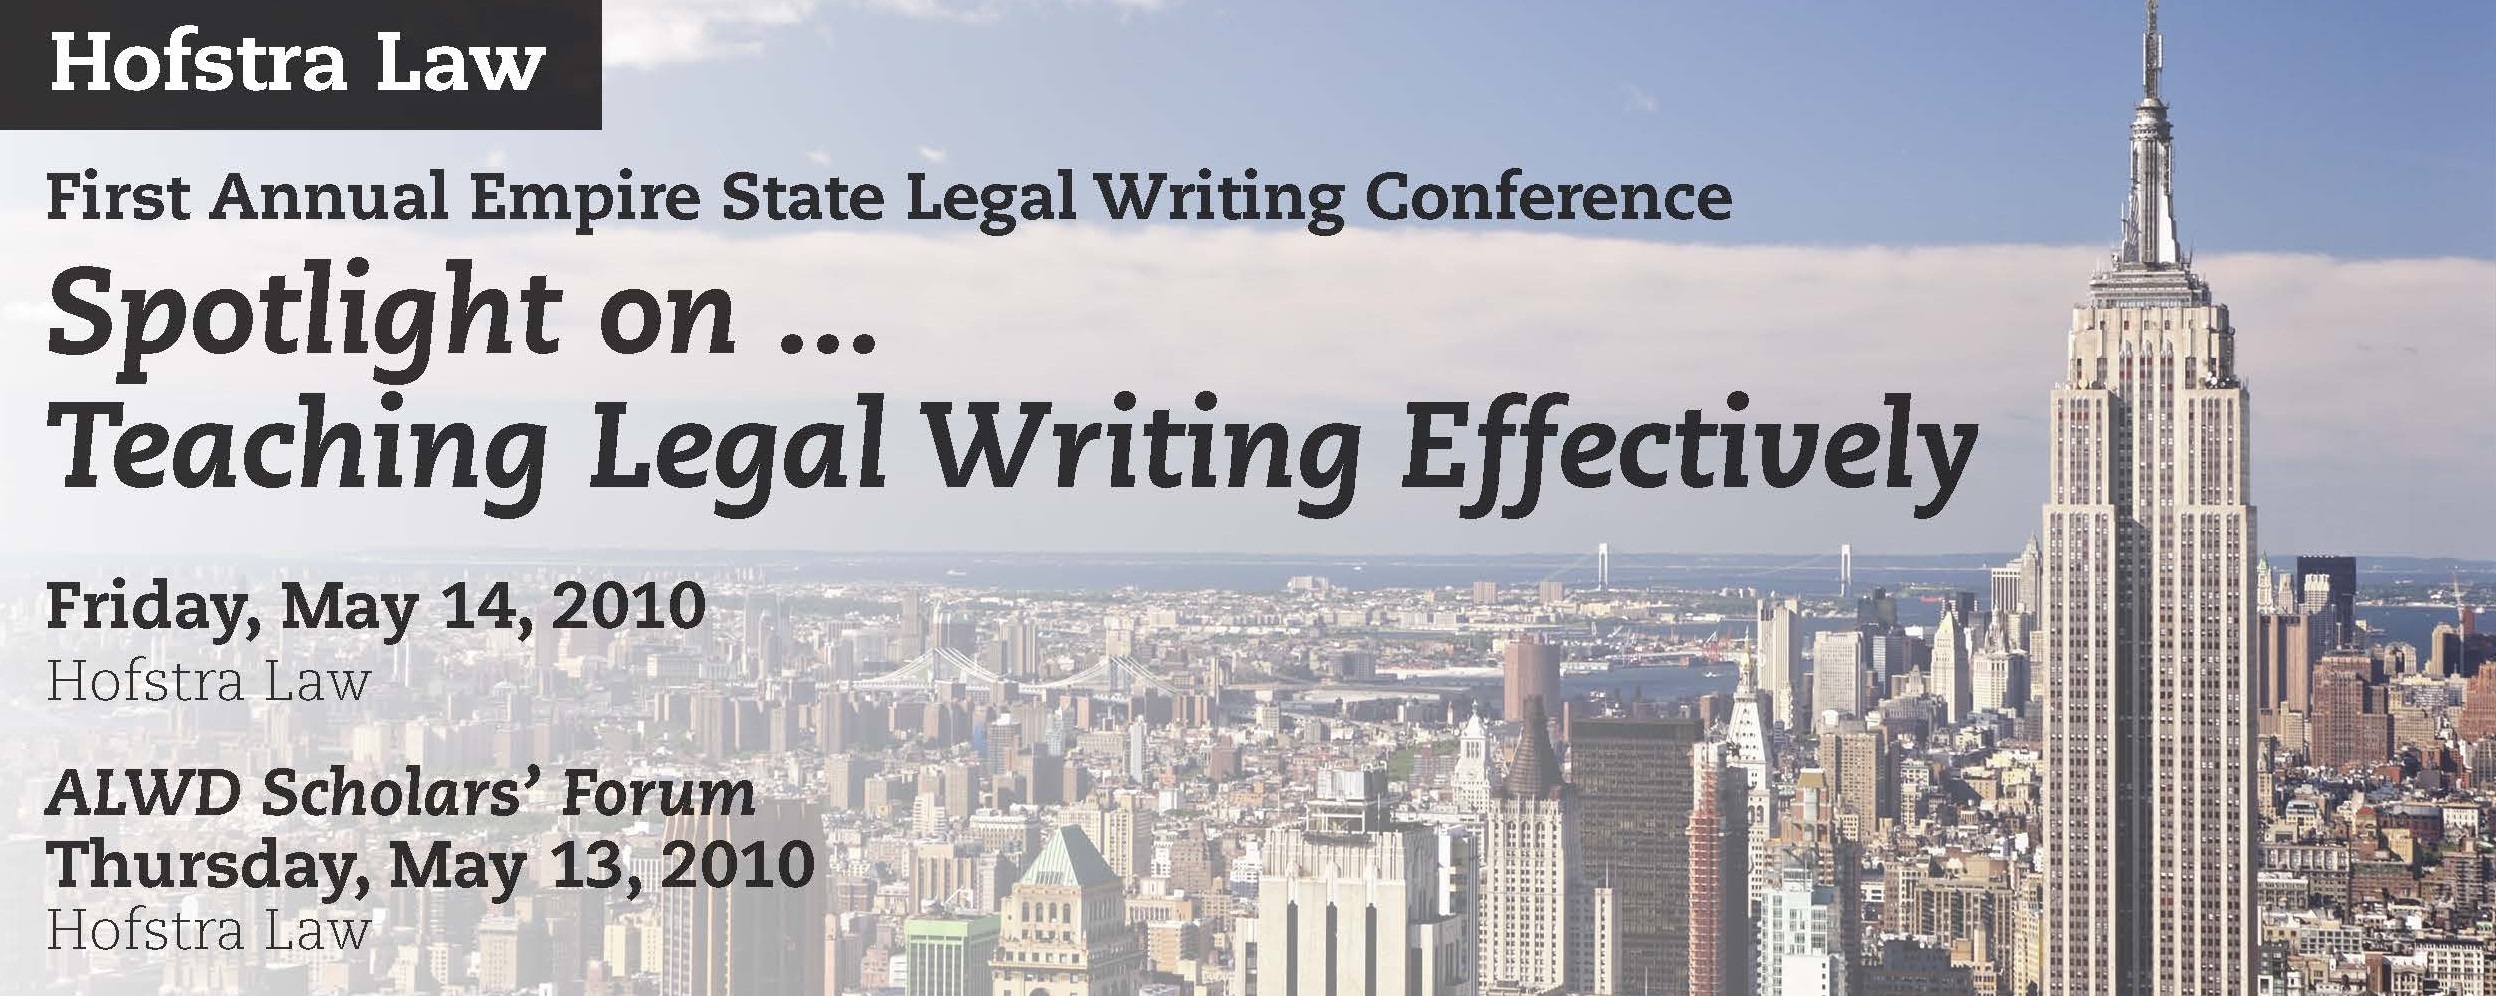 First Annual Empire State Legal Writing Conference: Spotlight on ...Teaching Legal Writing Effectively (2010)